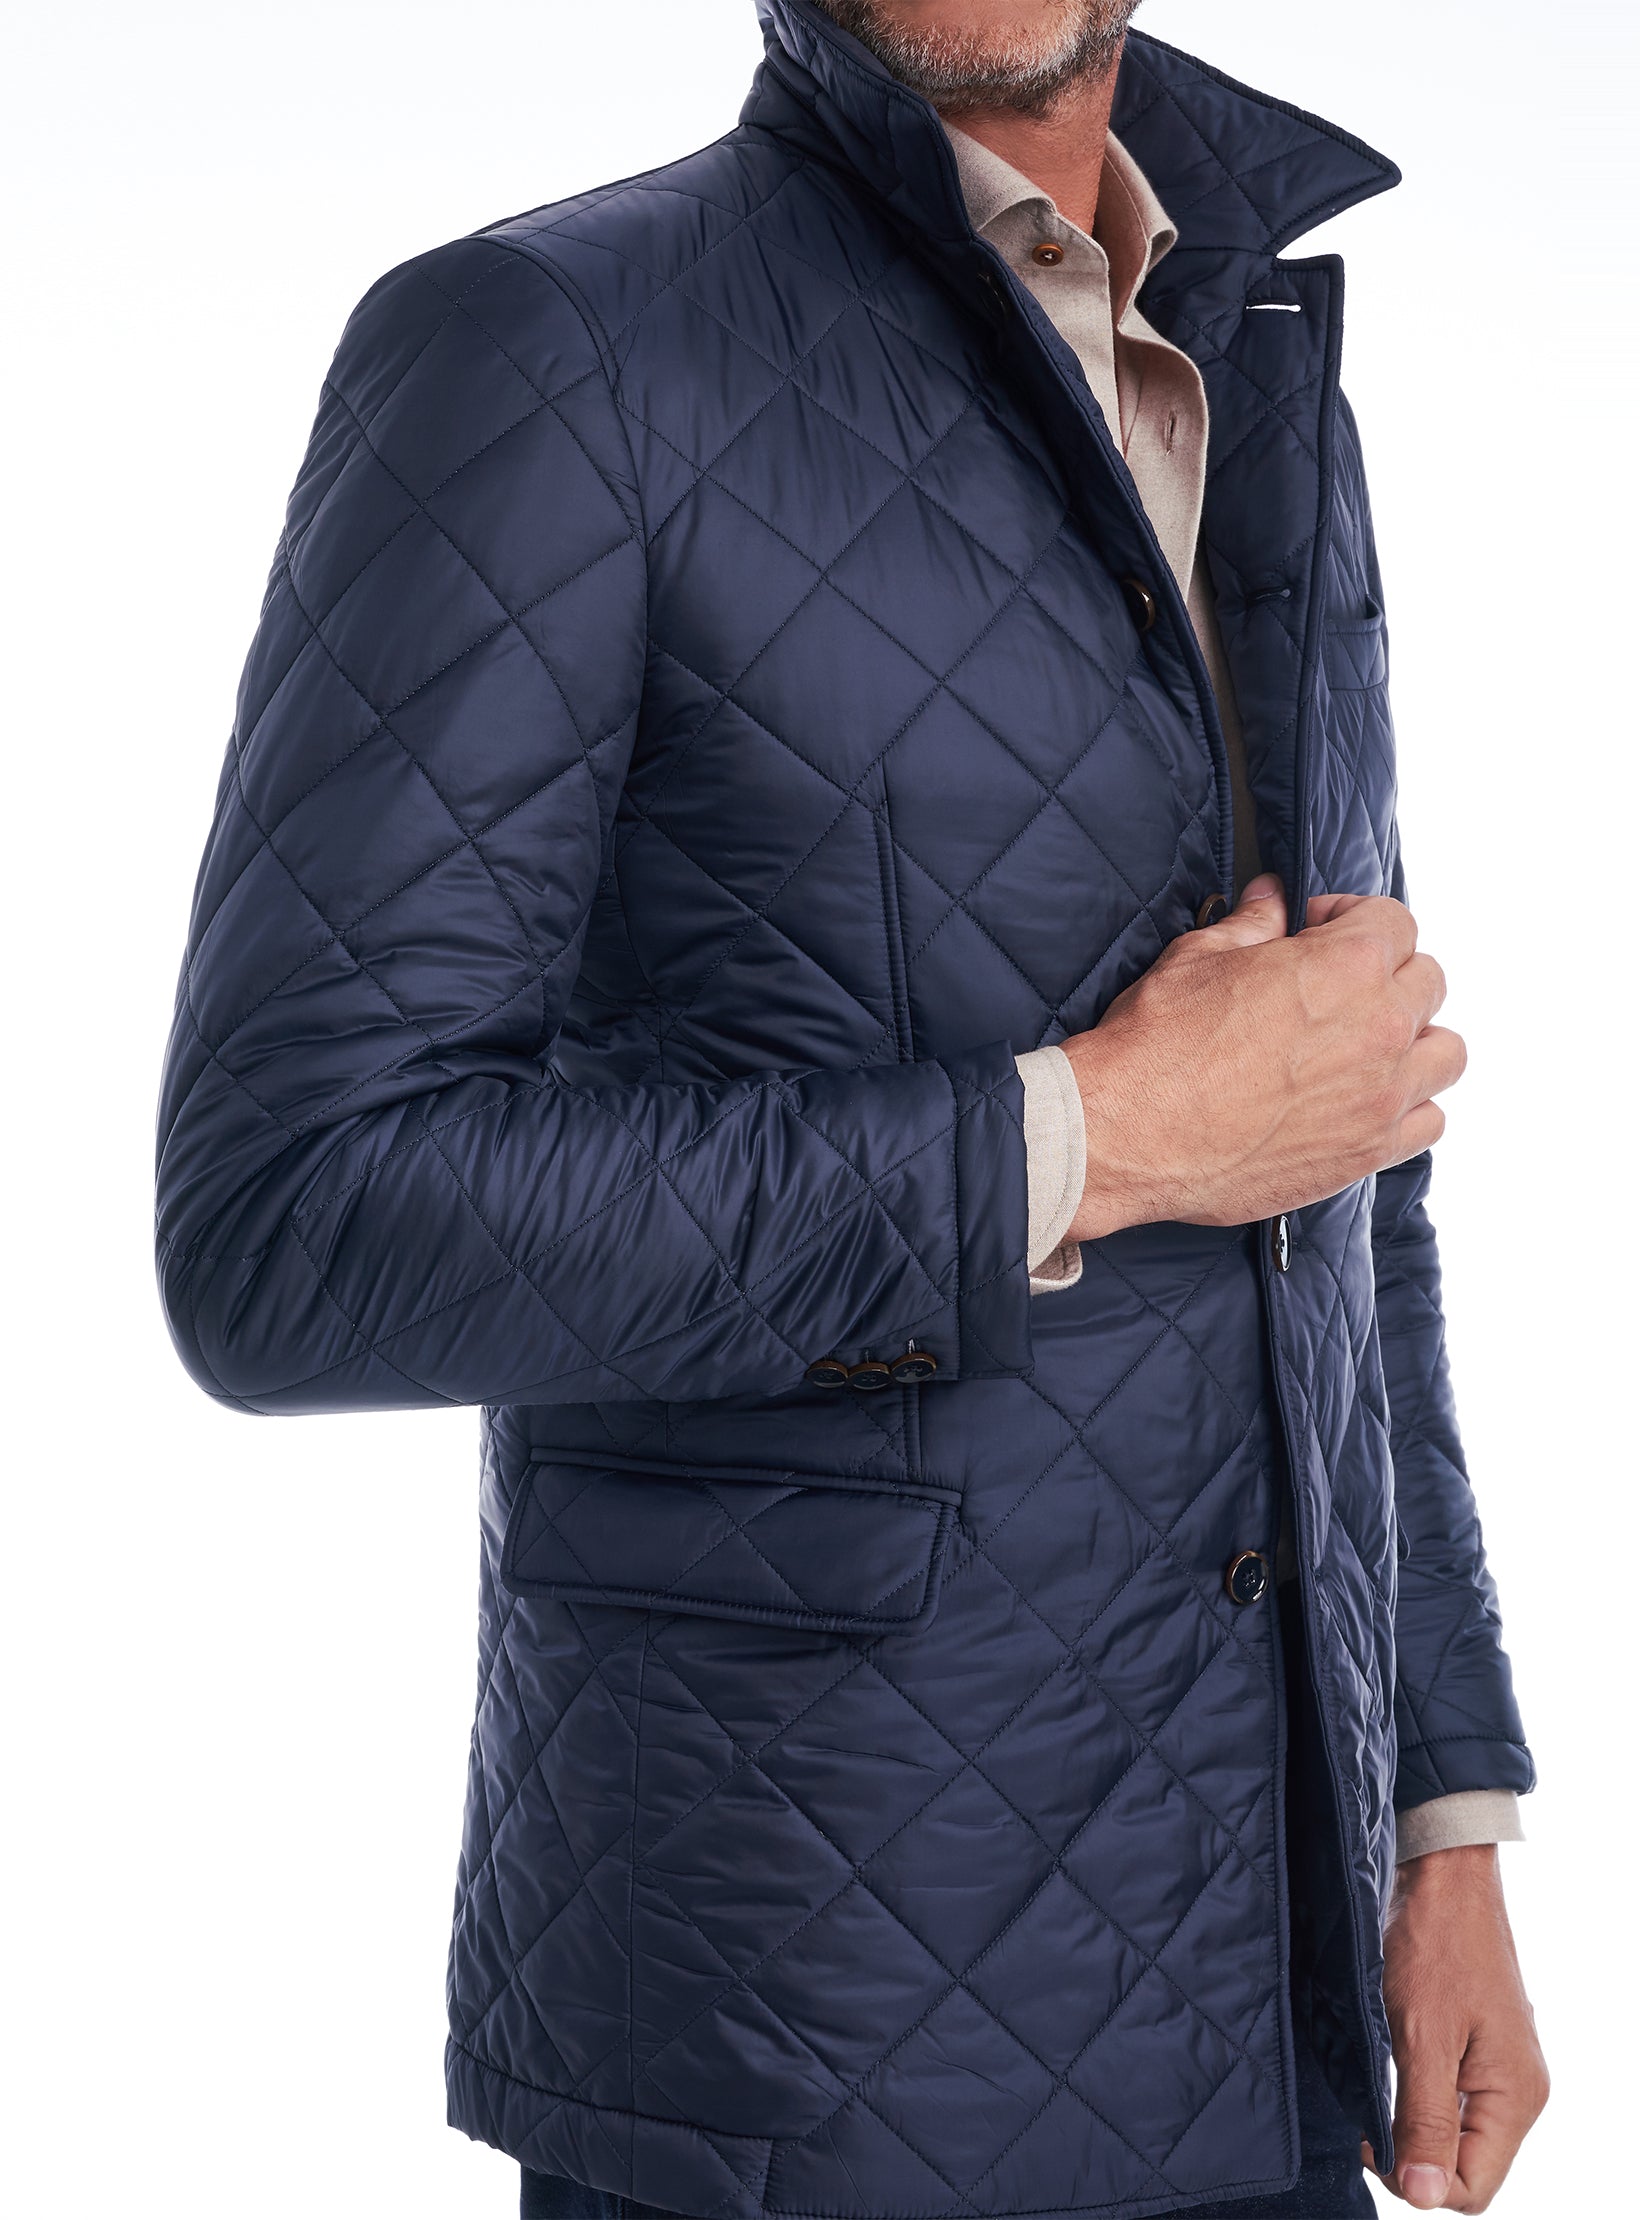 Quilted Jacket Lyon Consiglieri